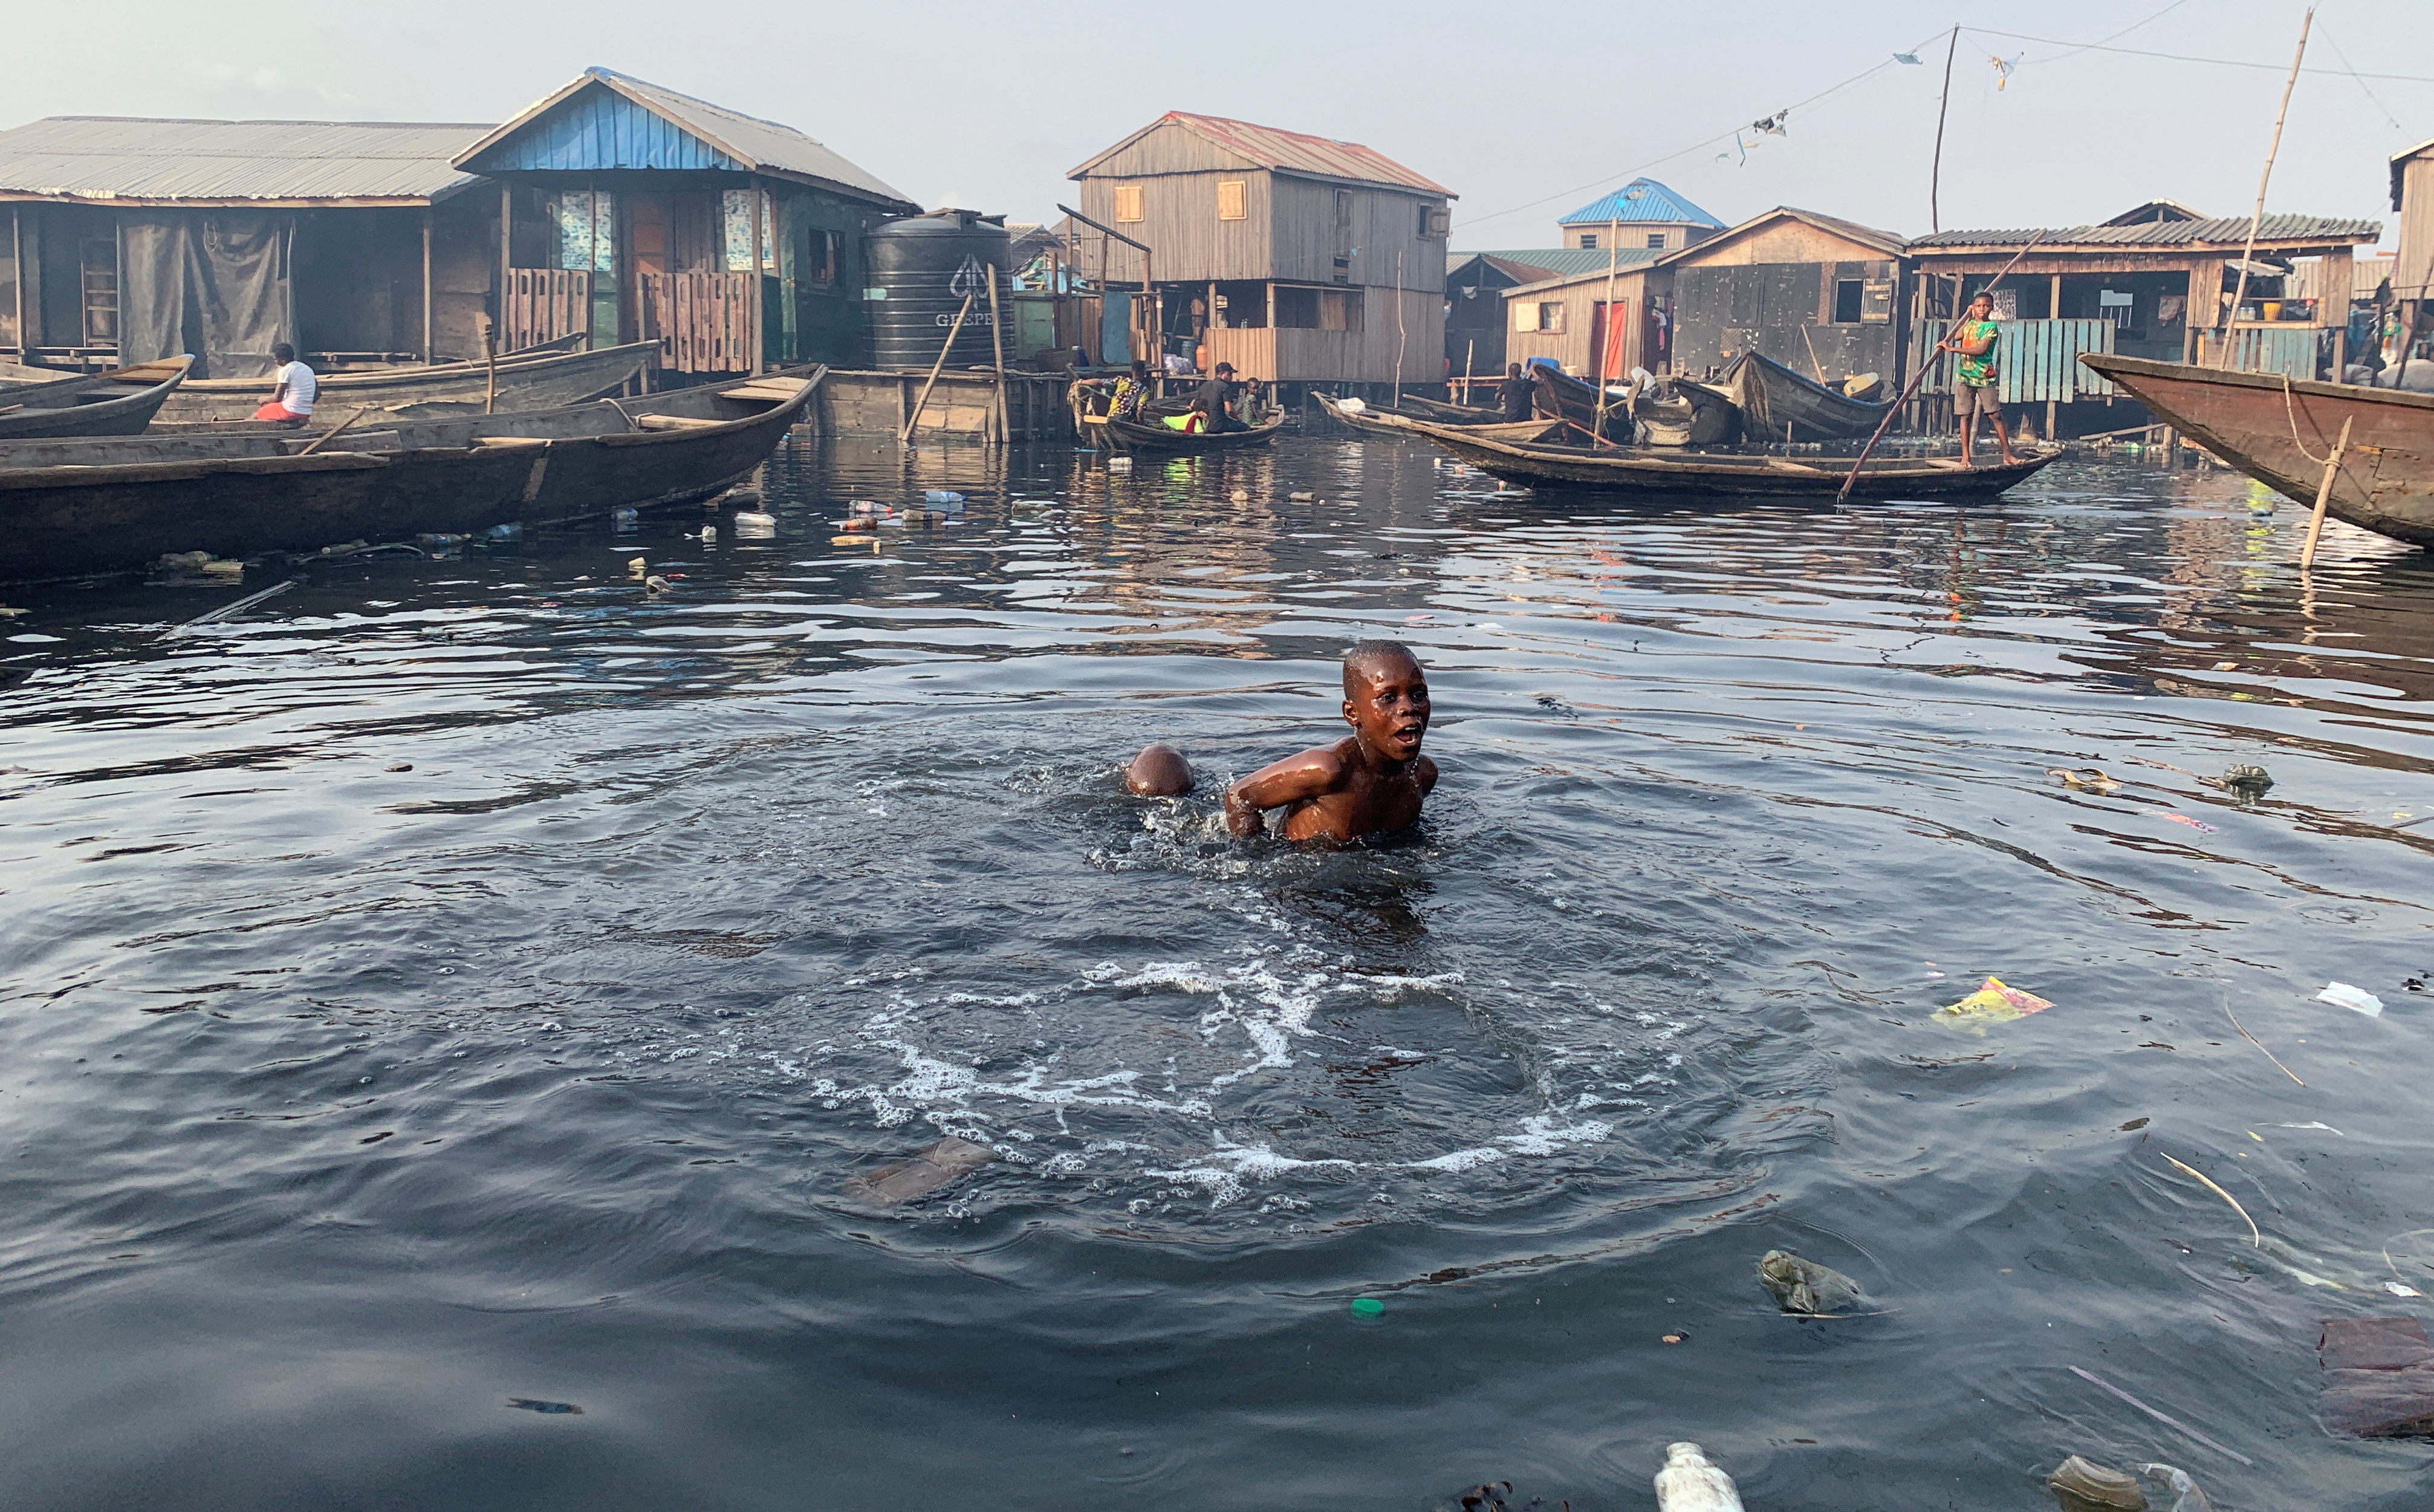 A boy swims in the polluted water of the Makoko community in Lagos